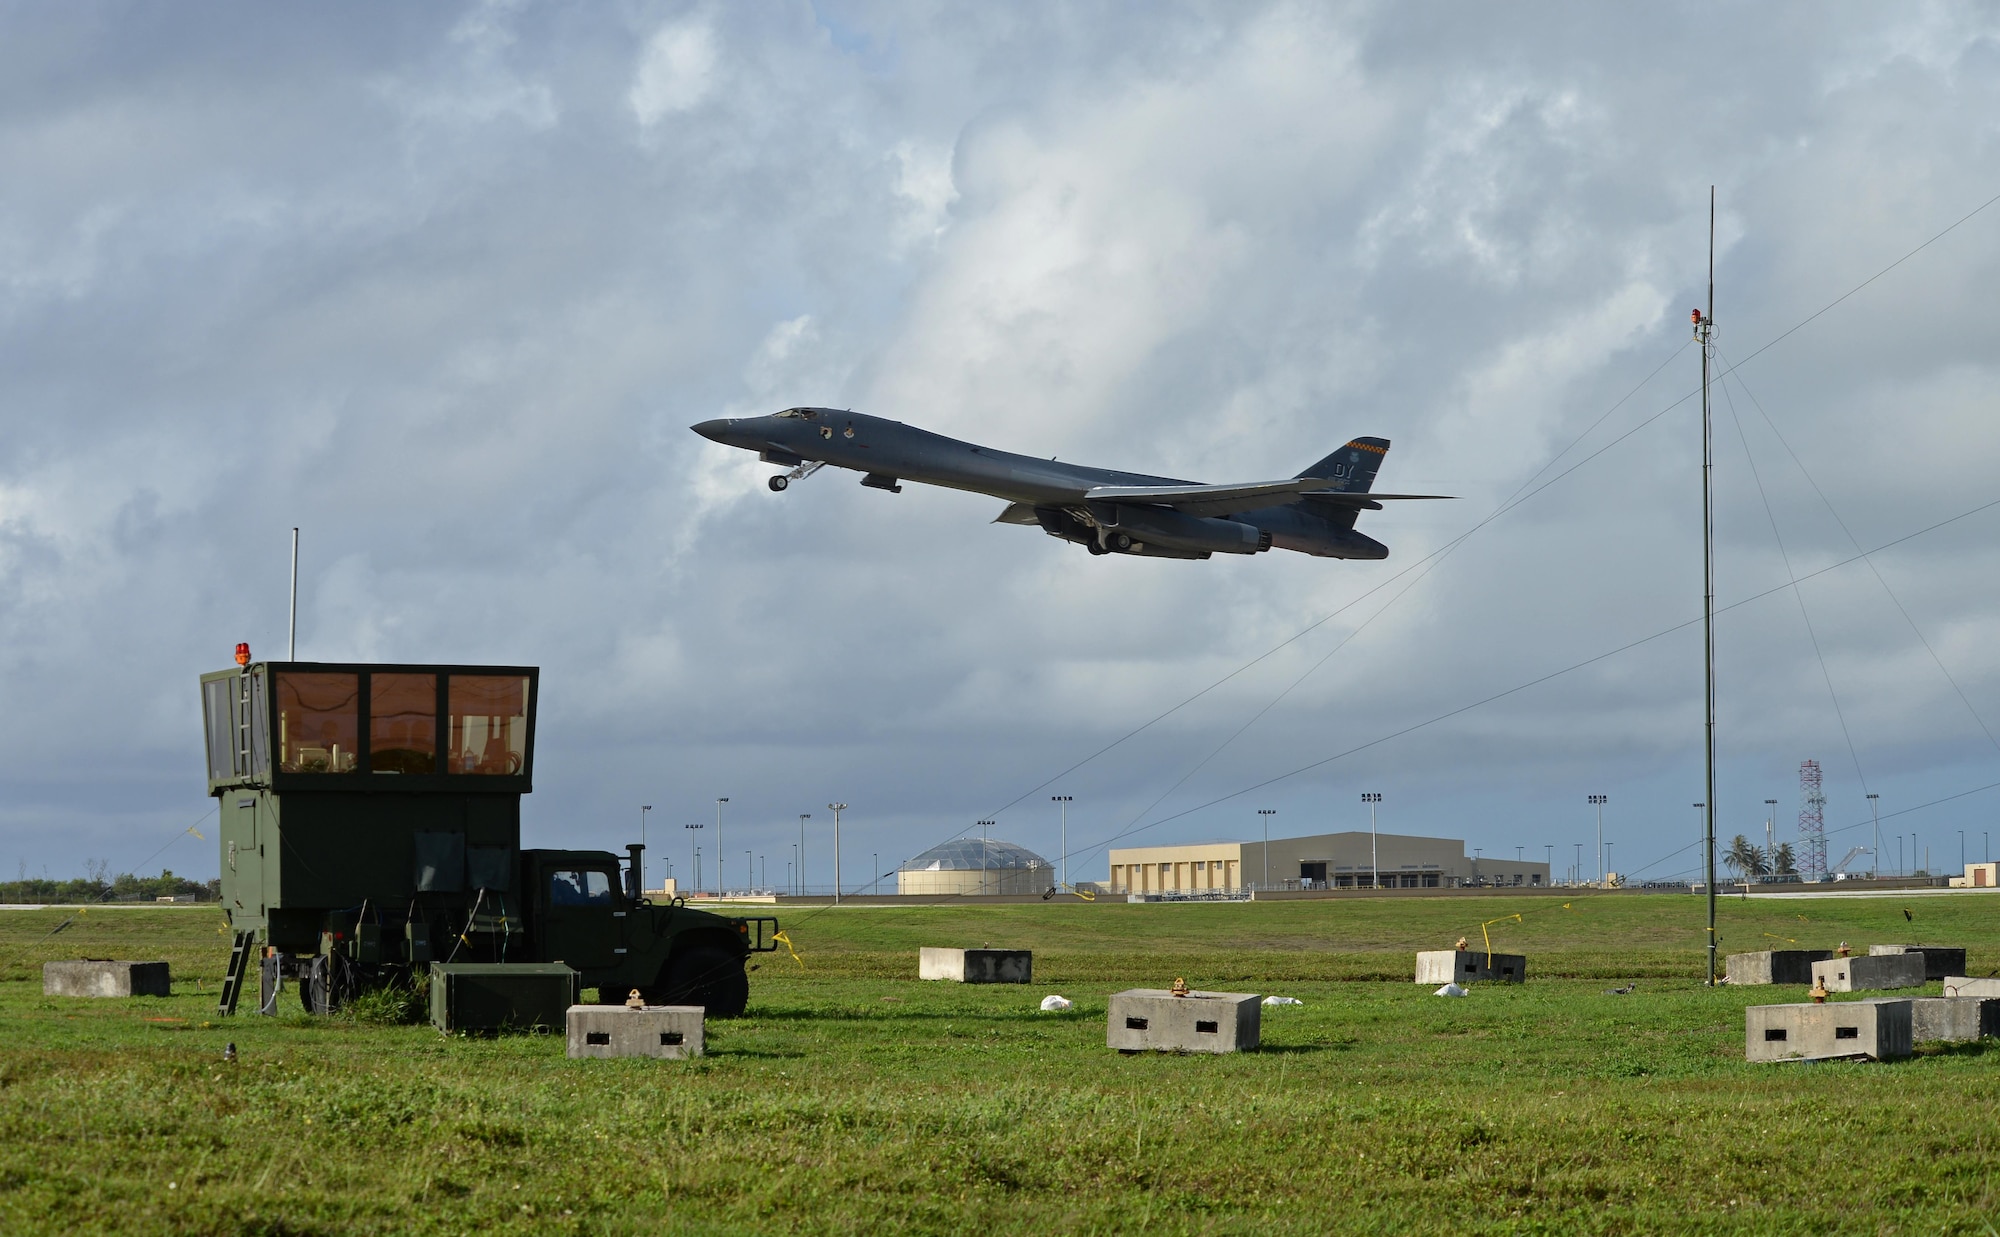 A B-1B Lancer takes off next to an MSN-7 mobile tower unit parked on the flightline June 22, 2017, at Andersen Air Force Base, Guam. Air traffic control Airmen assigned to the 36th Operation Support Squadron began work in the new tower cab here June 30 after spending almost three months working in the mobile tower unit on the flightline. (U.S. Air Force photo by Senior Airman Alexa Ann Henderson) 